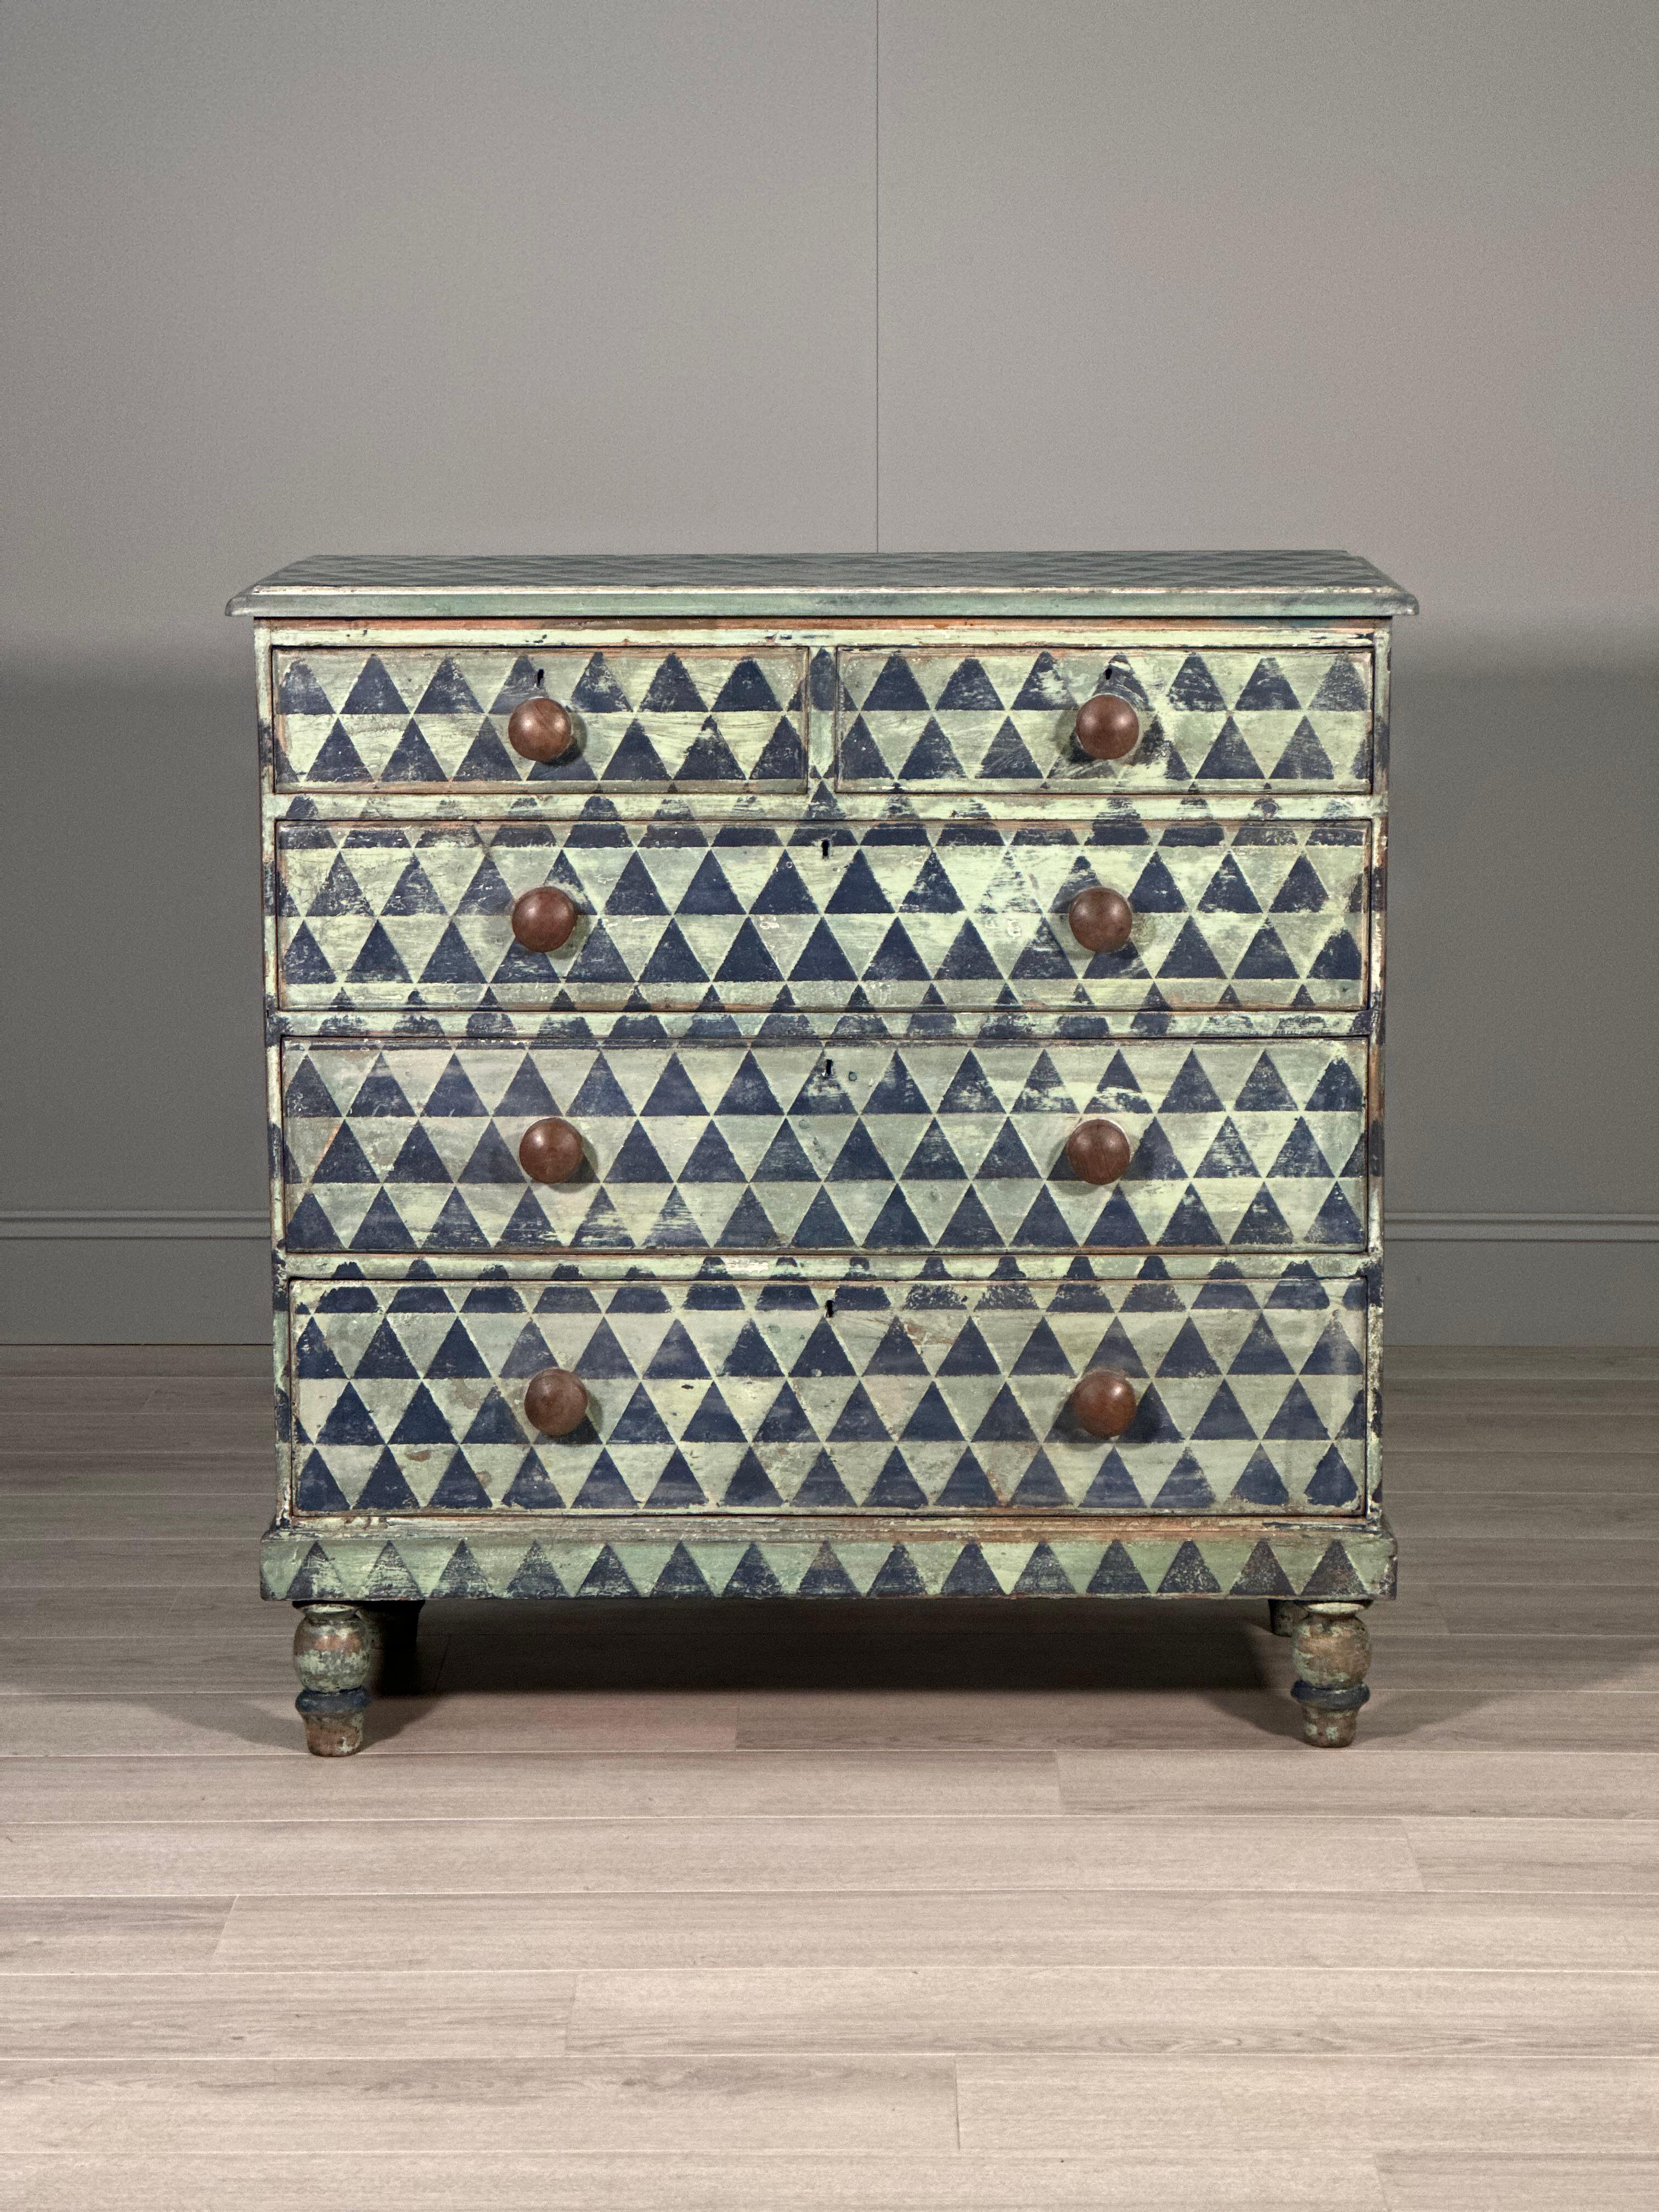 A large chest of drawers dating to the early part of the 19th century and painted in a geometric style. The chest is in very good condition with the perfect amount of wear to the paint.

